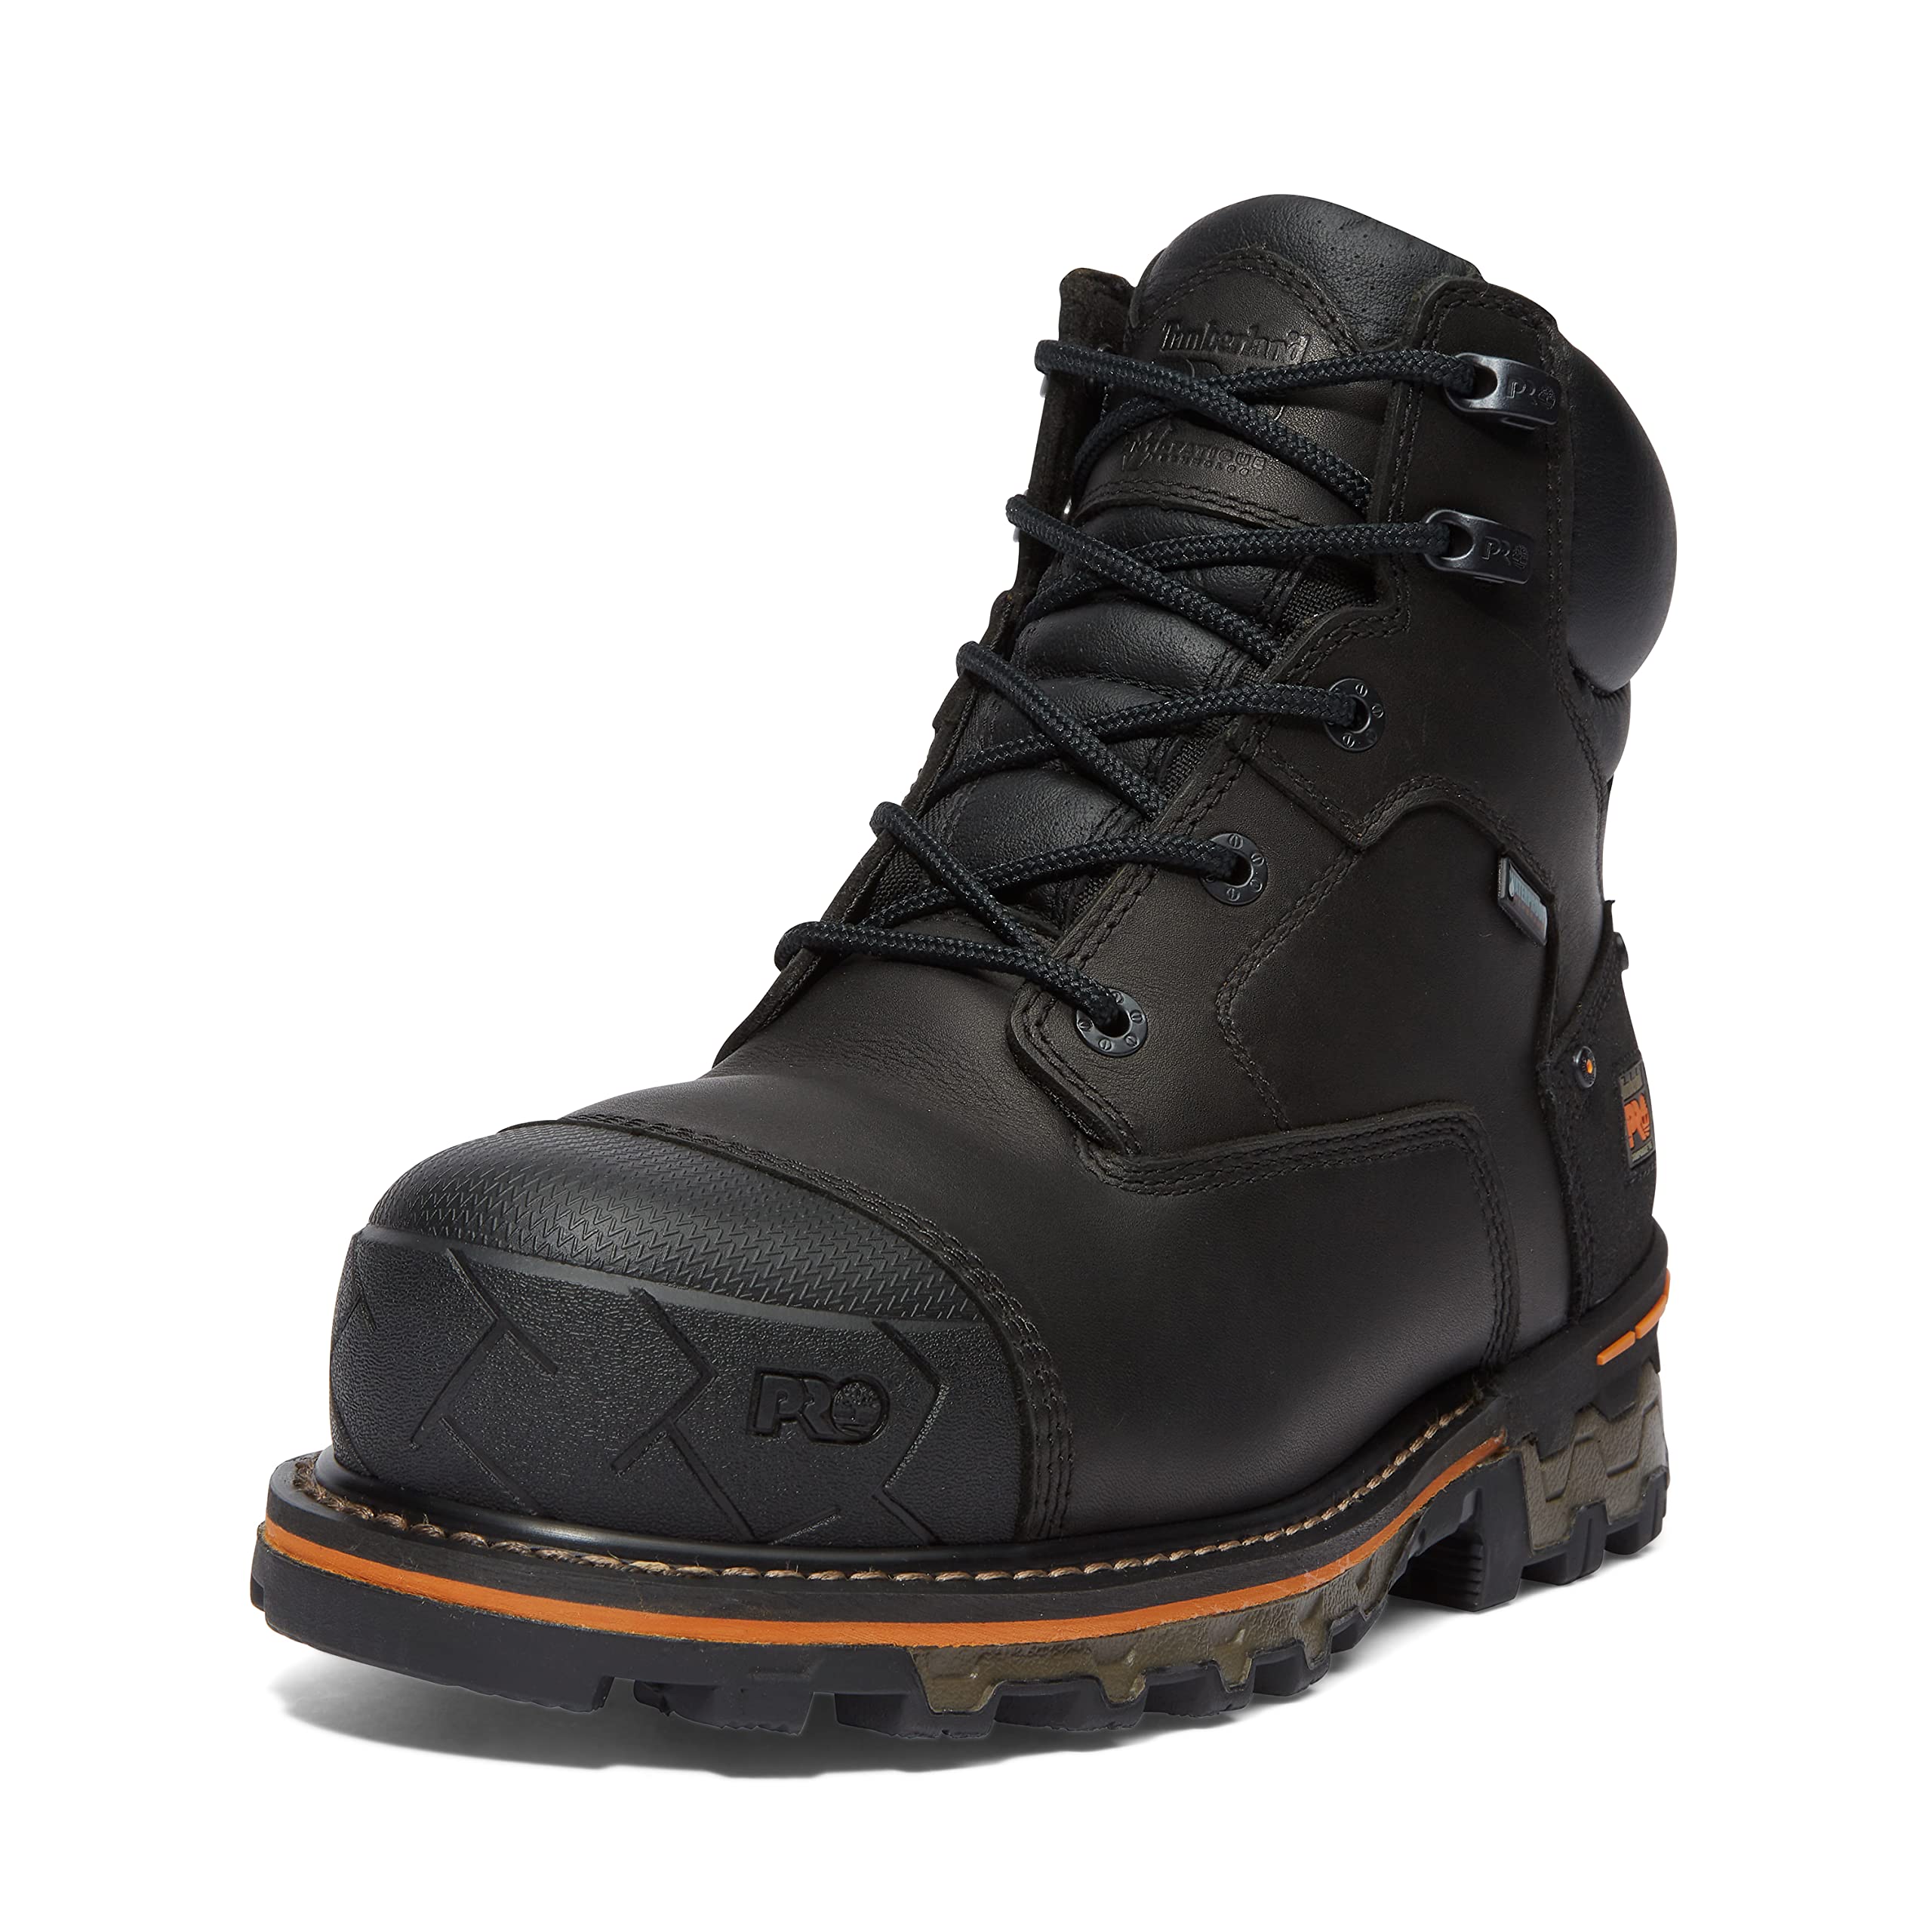 Timberland PRO Men's 6 Inch Boondock Comp Toe WP Insulated Industrial Work Boot